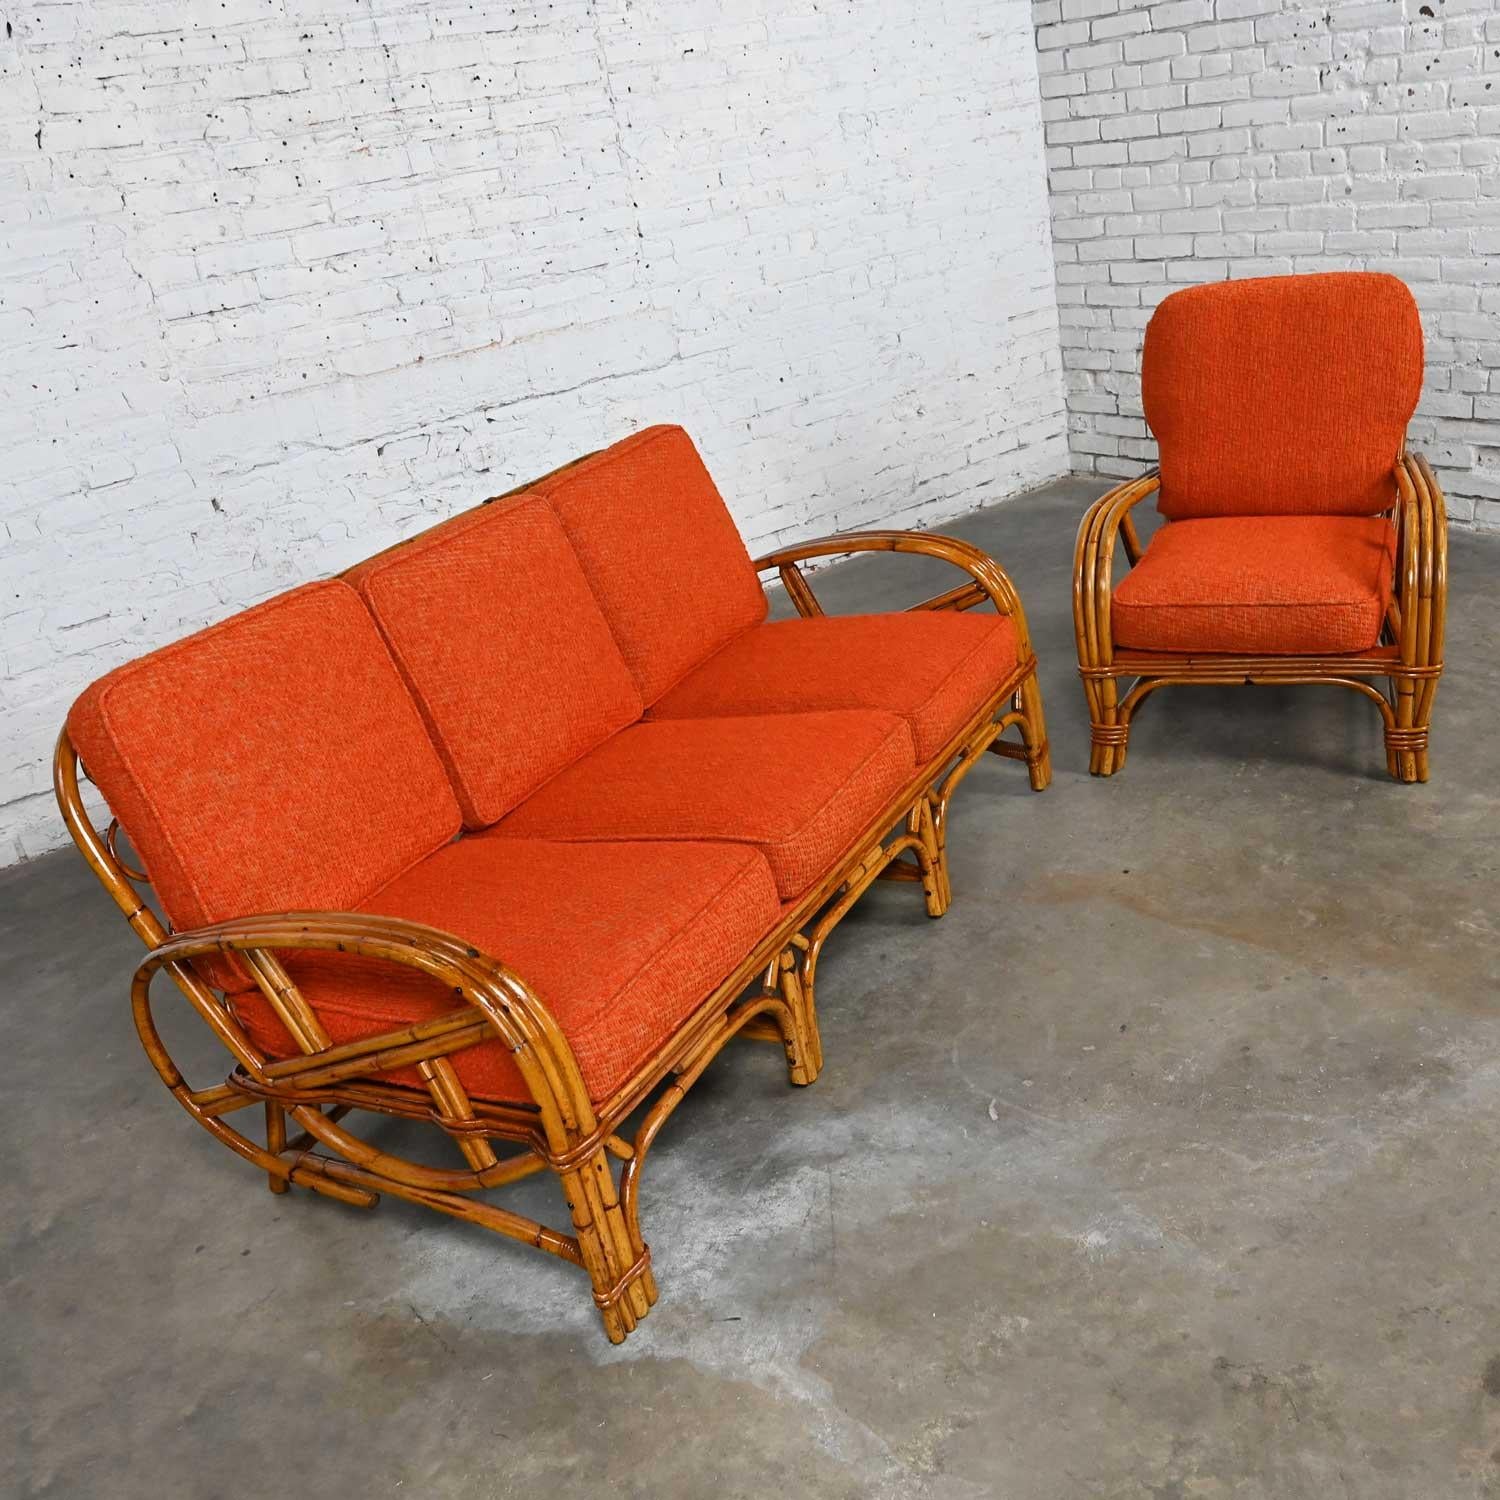 Wonderful vintage triple strand rattan sofa and chair in the style of Heywood Wakefield with zippered orange nubby fabric and original foam filled cushions. Beautiful condition, keeping in mind that these are vintage and not new so will have signs